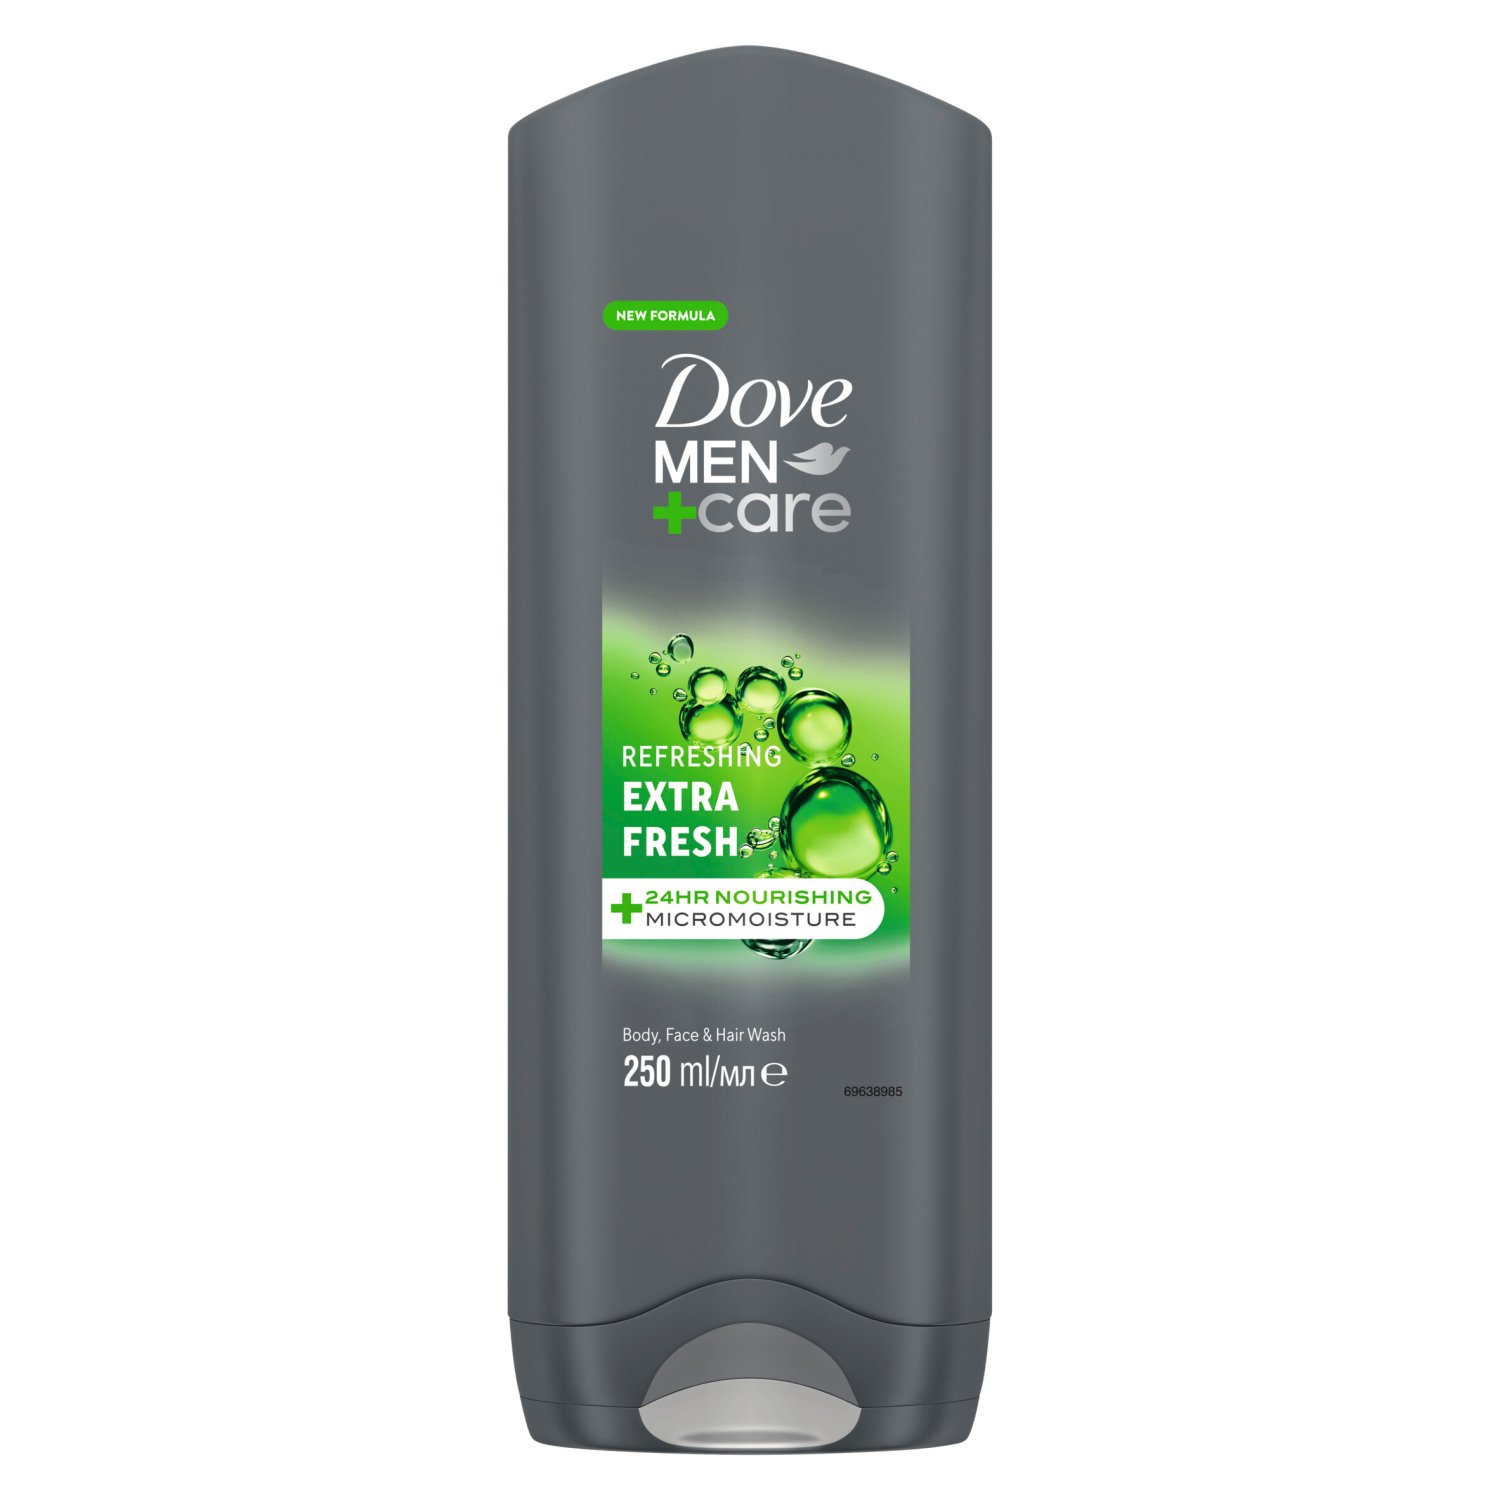 Dove Men+Care Extra Fresh Body and Face Wash (250 ml)